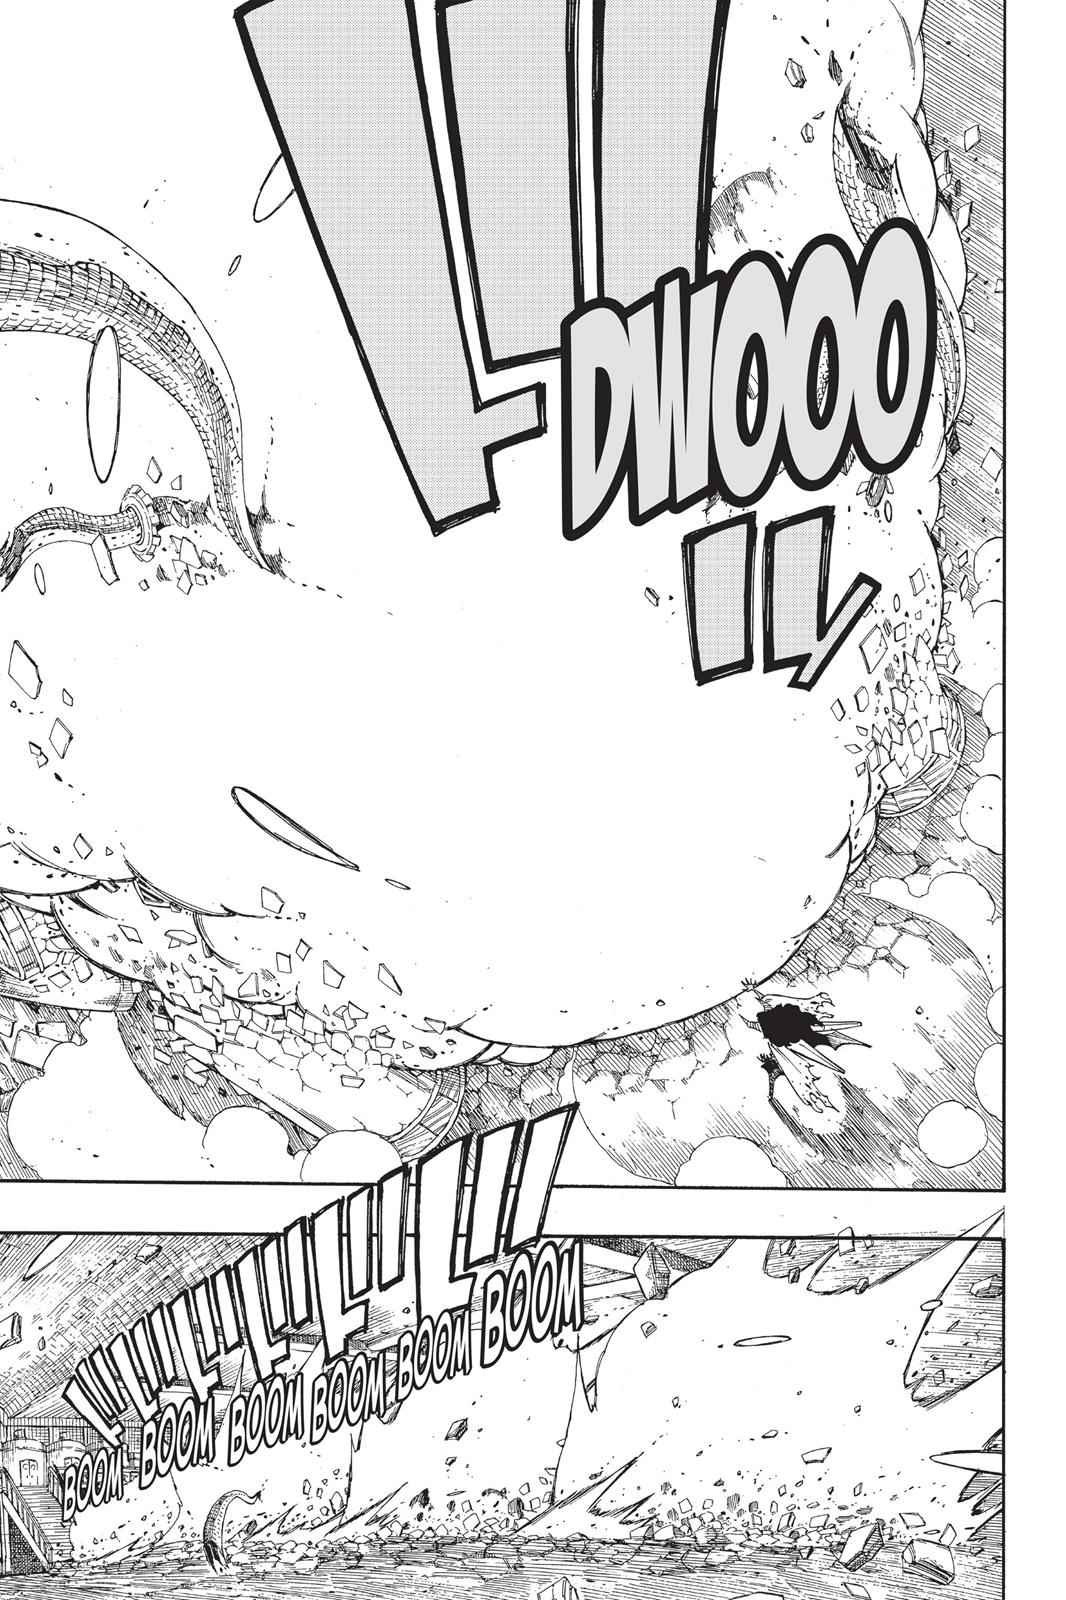  Chapter 380 image 017